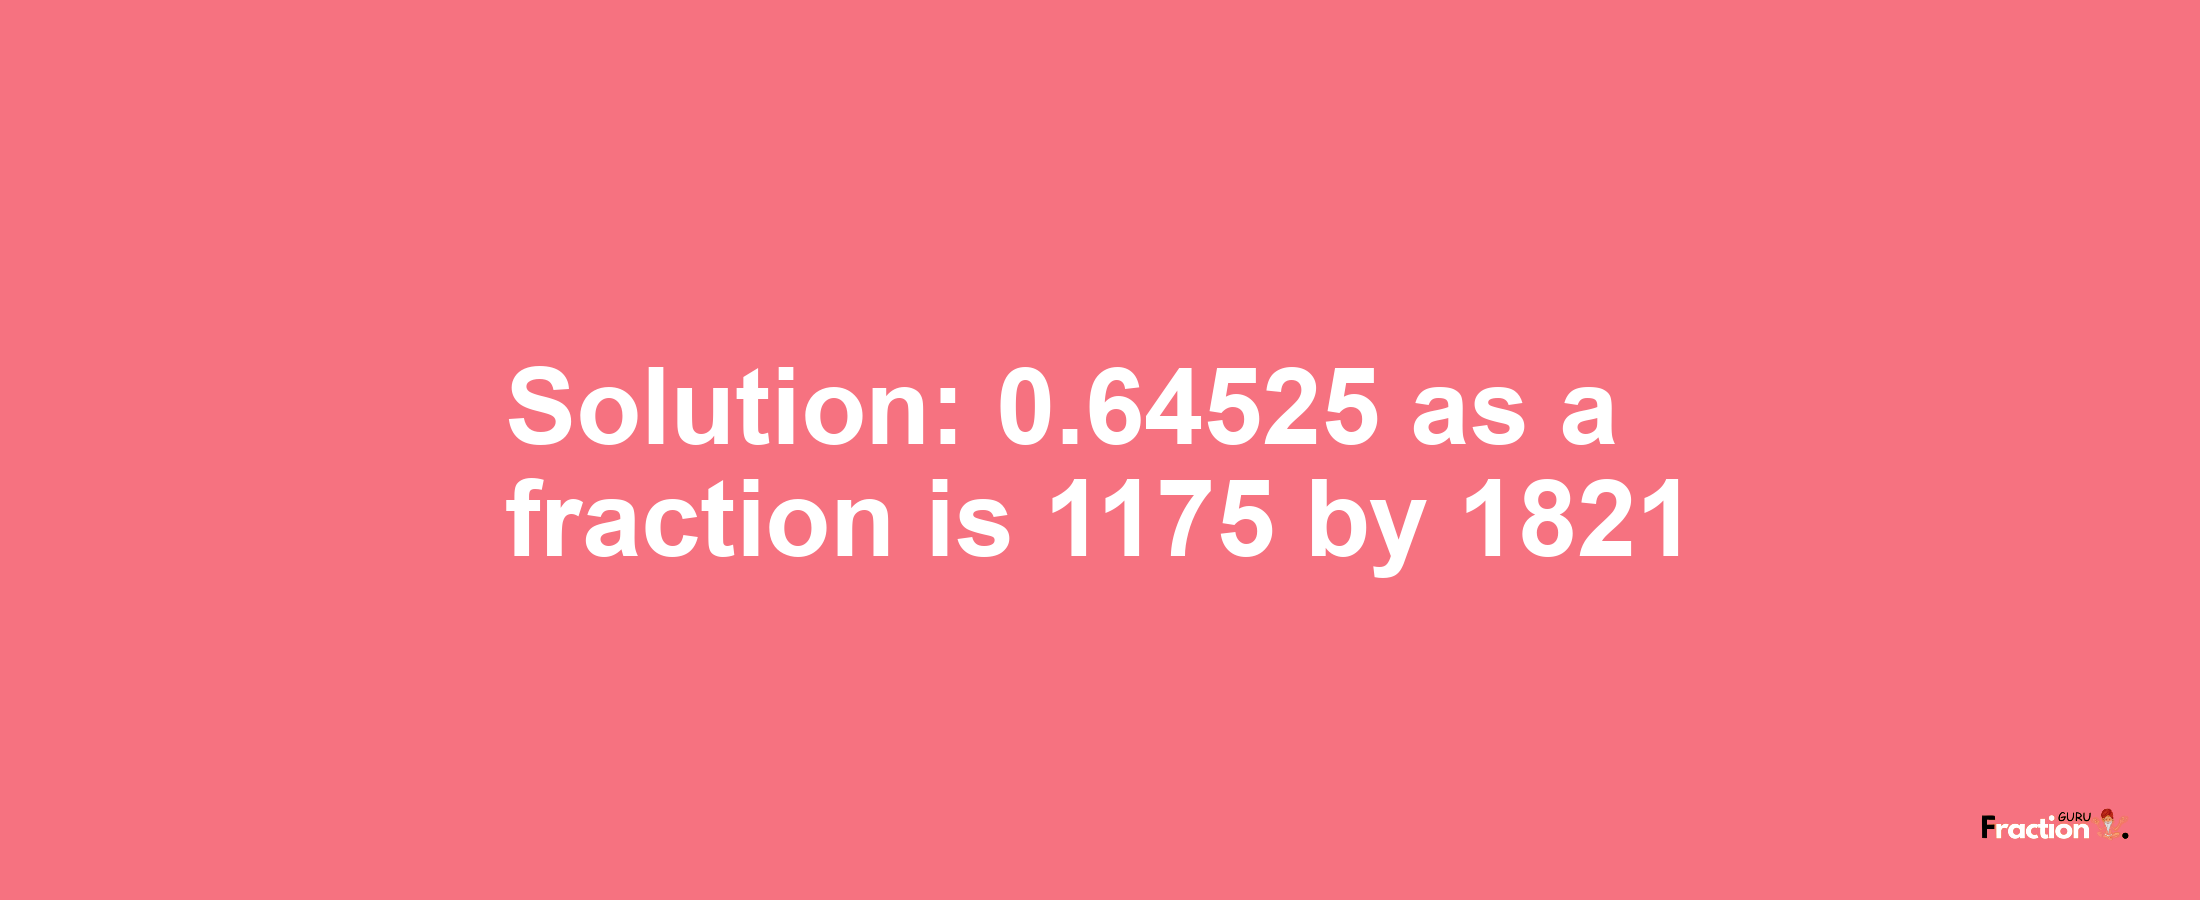 Solution:0.64525 as a fraction is 1175/1821